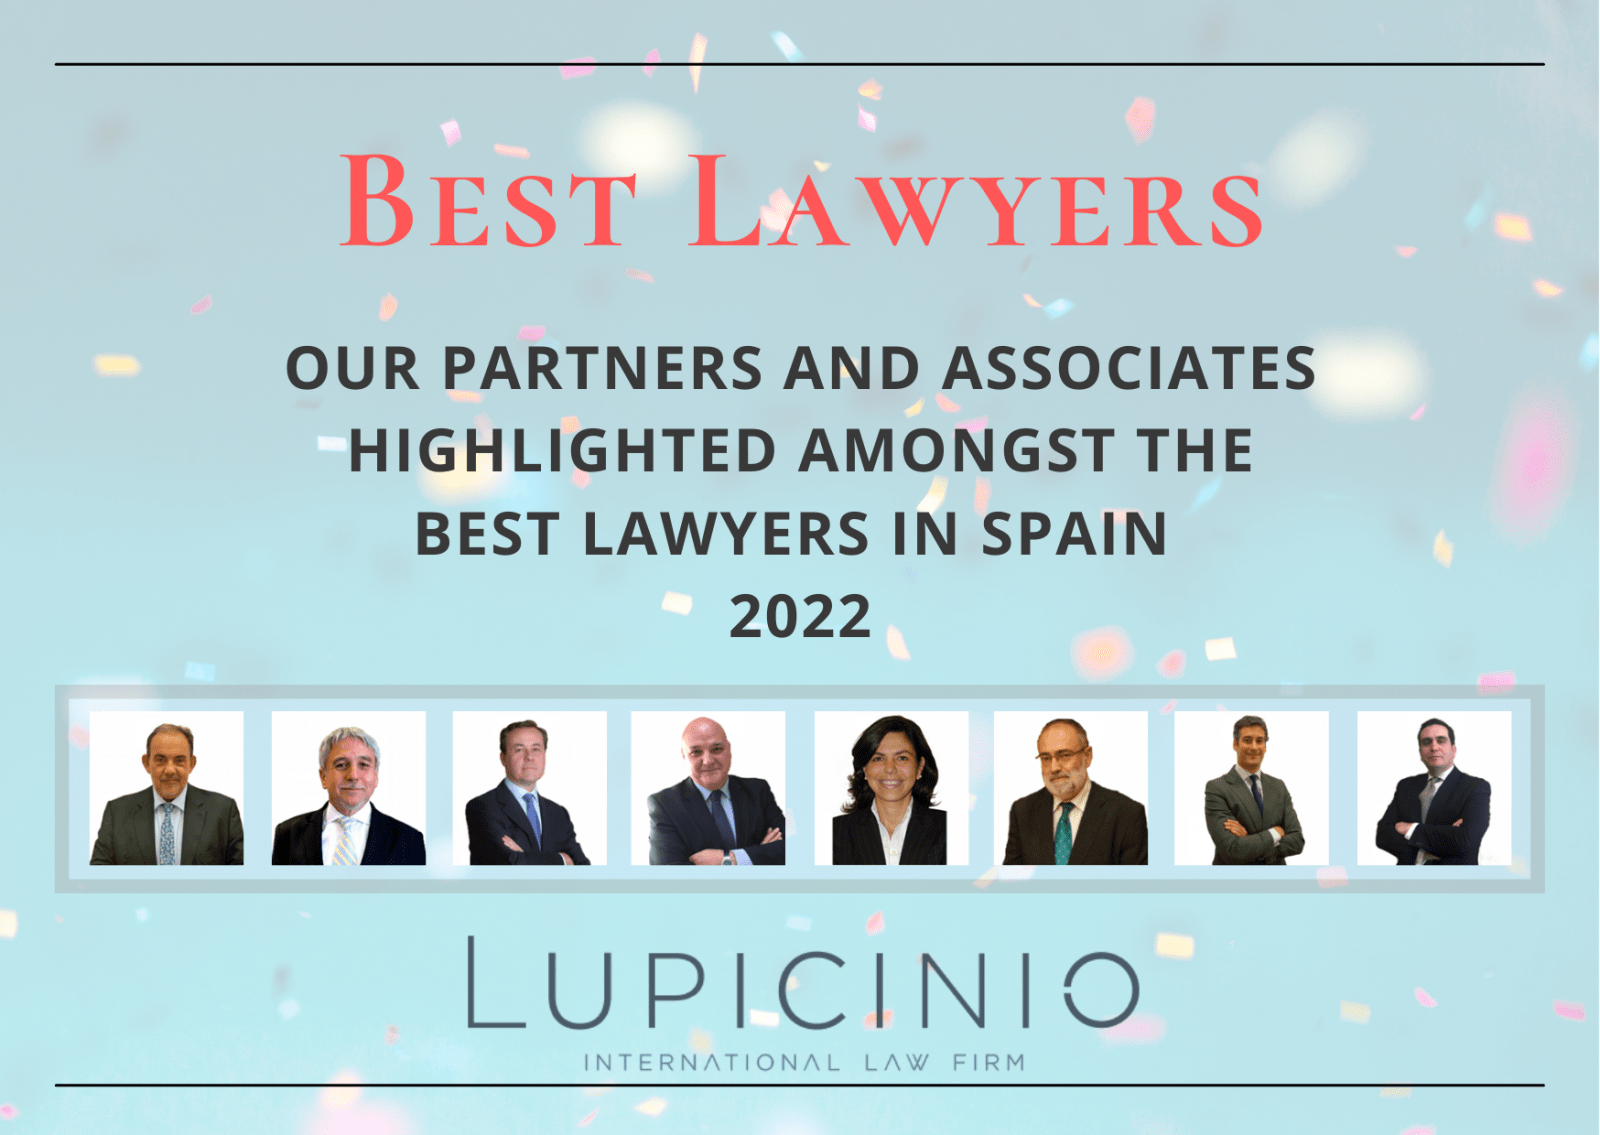 Our partners and associates highlighted amongst the Best Lawyers in Spain 2022